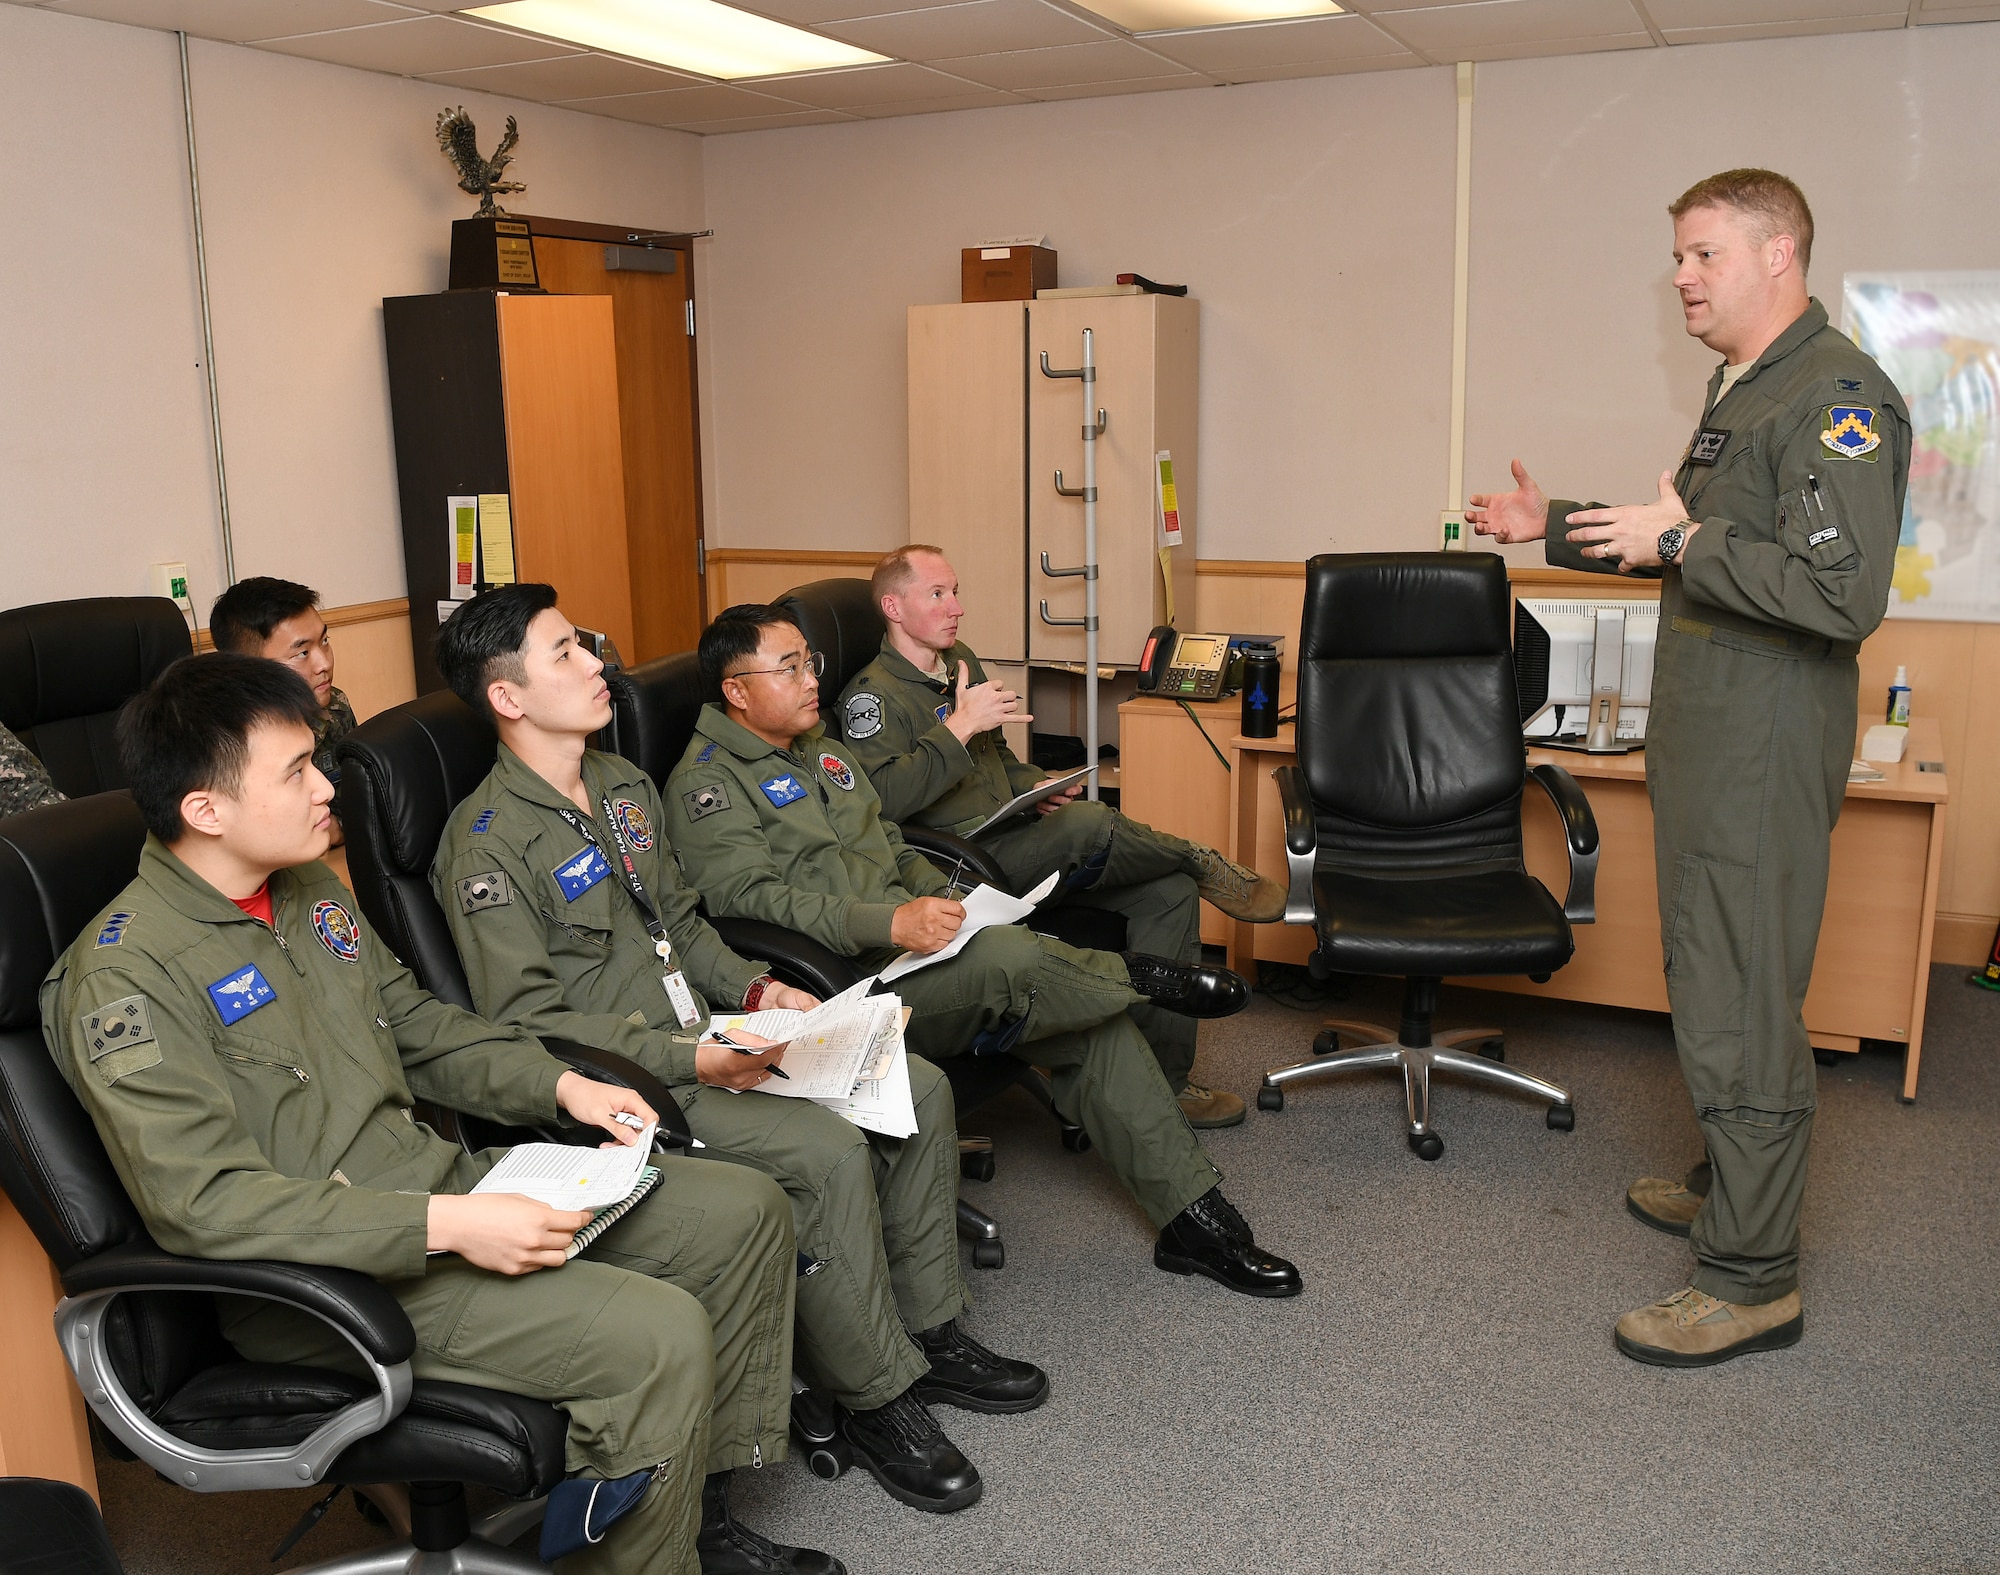 Col. David G. Shoemaker, “Wolf”, 8th Fighter Wing commander, reviews mission plans with U.S. Air Force and Republic of Korea Air Force pilots during the “Friendship Flight” mission pre-flight brief at Kunsan Air Base, Republic of Korea, Oct. 30, 2017. The “Friendship Flight” continued a long history of various joint training missions focused on strengthening partnerships and capabilities between the two nations, ensuring combined combat readiness on the Korean Peninsula.